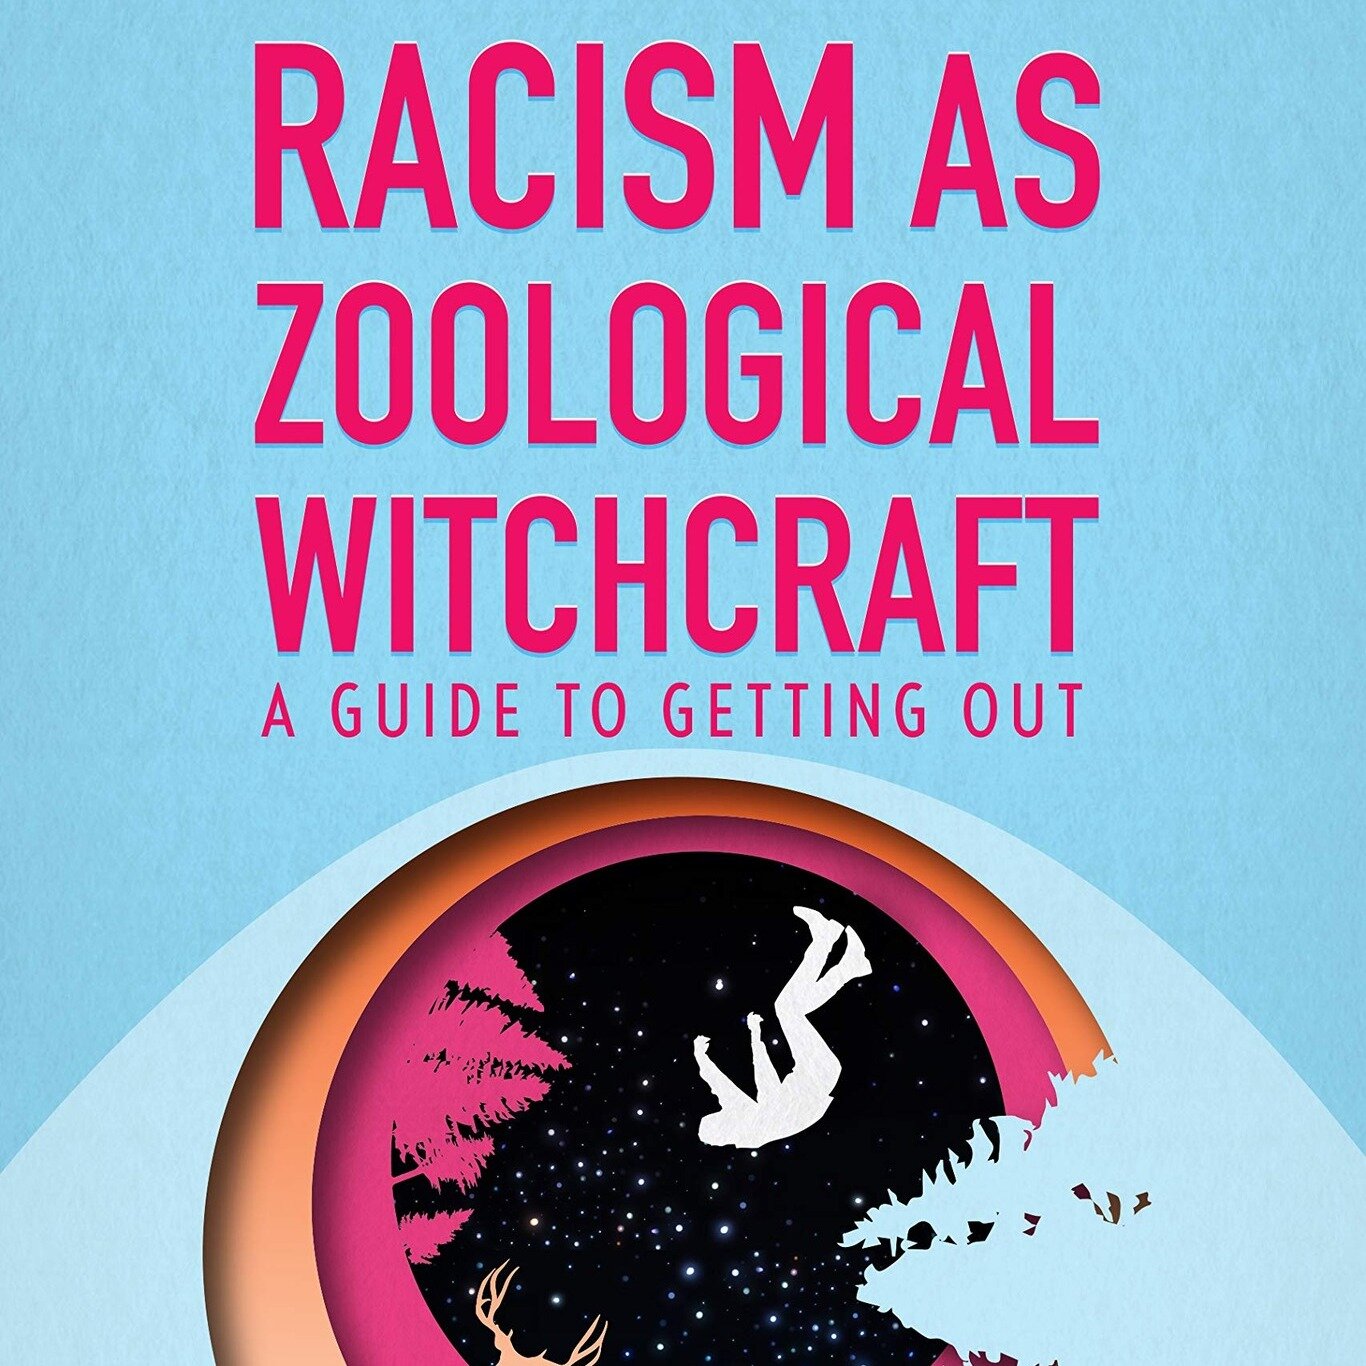 New CEU Offering! 

Racism as Zoological Witchcraft: In this scintillating combination of critical race theory, social commentary, veganism, and gender analysis, media studies scholar Aph Ko offers a compelling vision of a reimagined social justice m